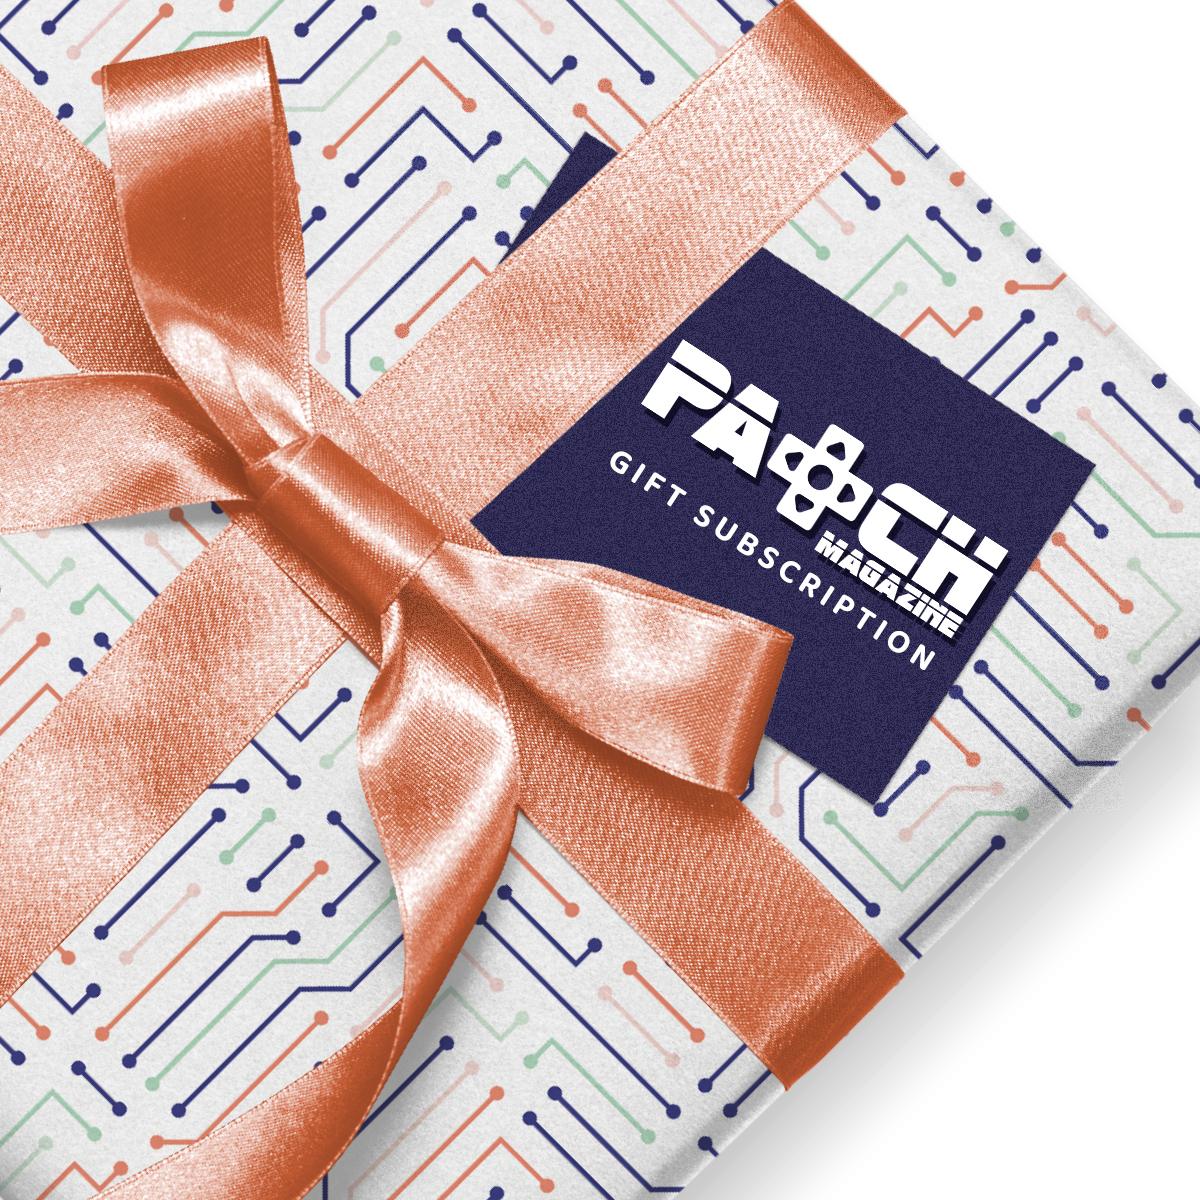 Patch Magazine Gift Subscription